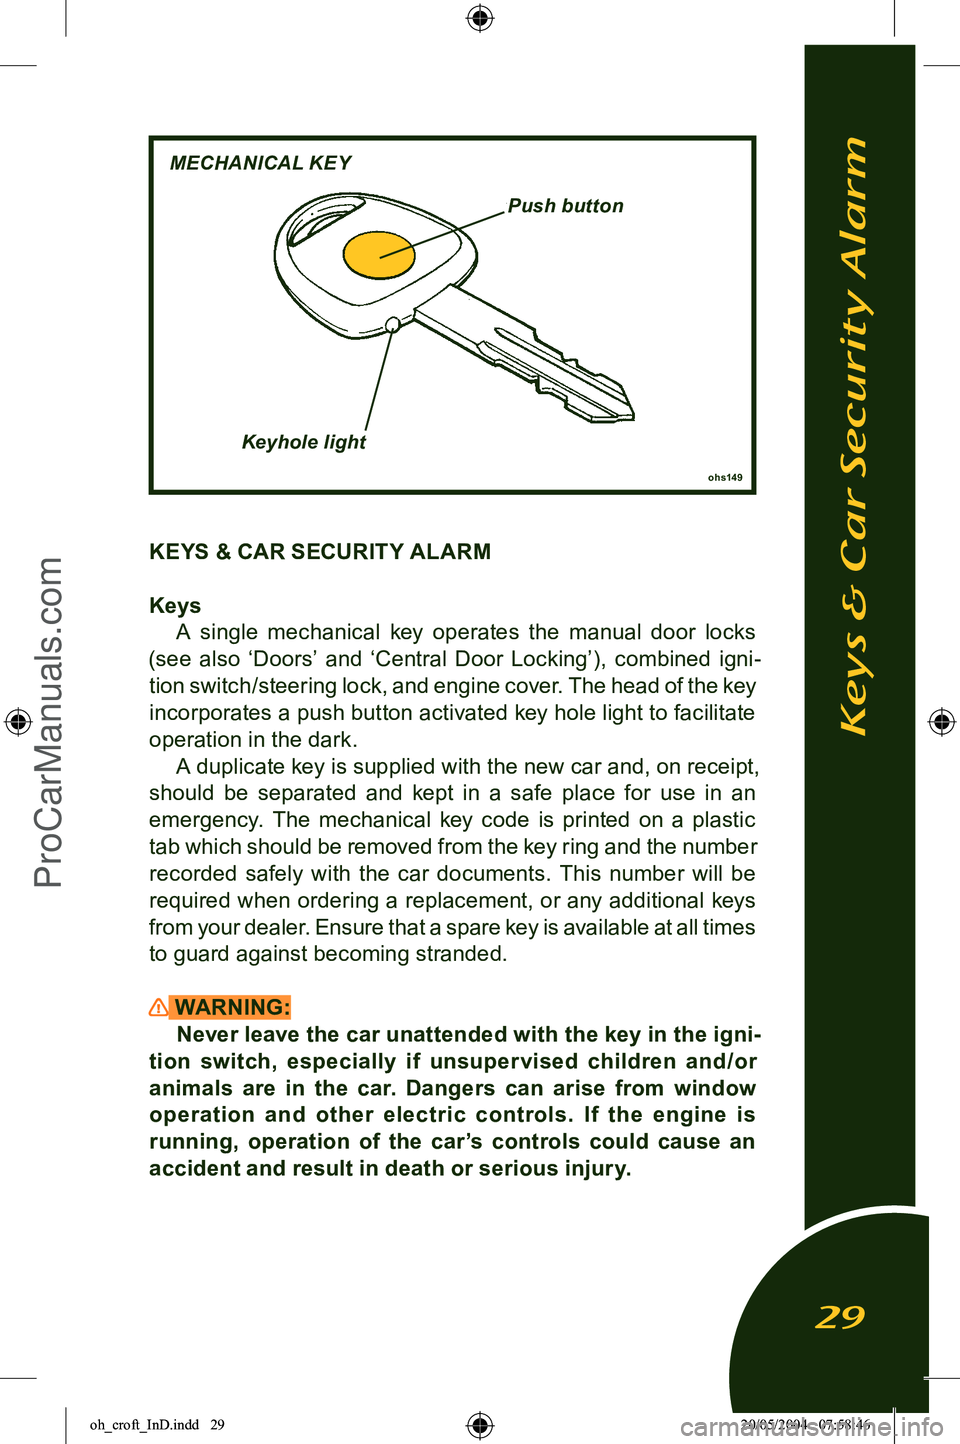 LOTUS ELISE 2005  Owners Manual 
KEYS & CAR SECURITY ALARM
KeysA  single  mechanical  key  operates  the  manual  door  locks 
(see  also  ‘Doors’  and  ‘Central  Door  Locking’),  combined  igni
-
tion switch/steering lock,